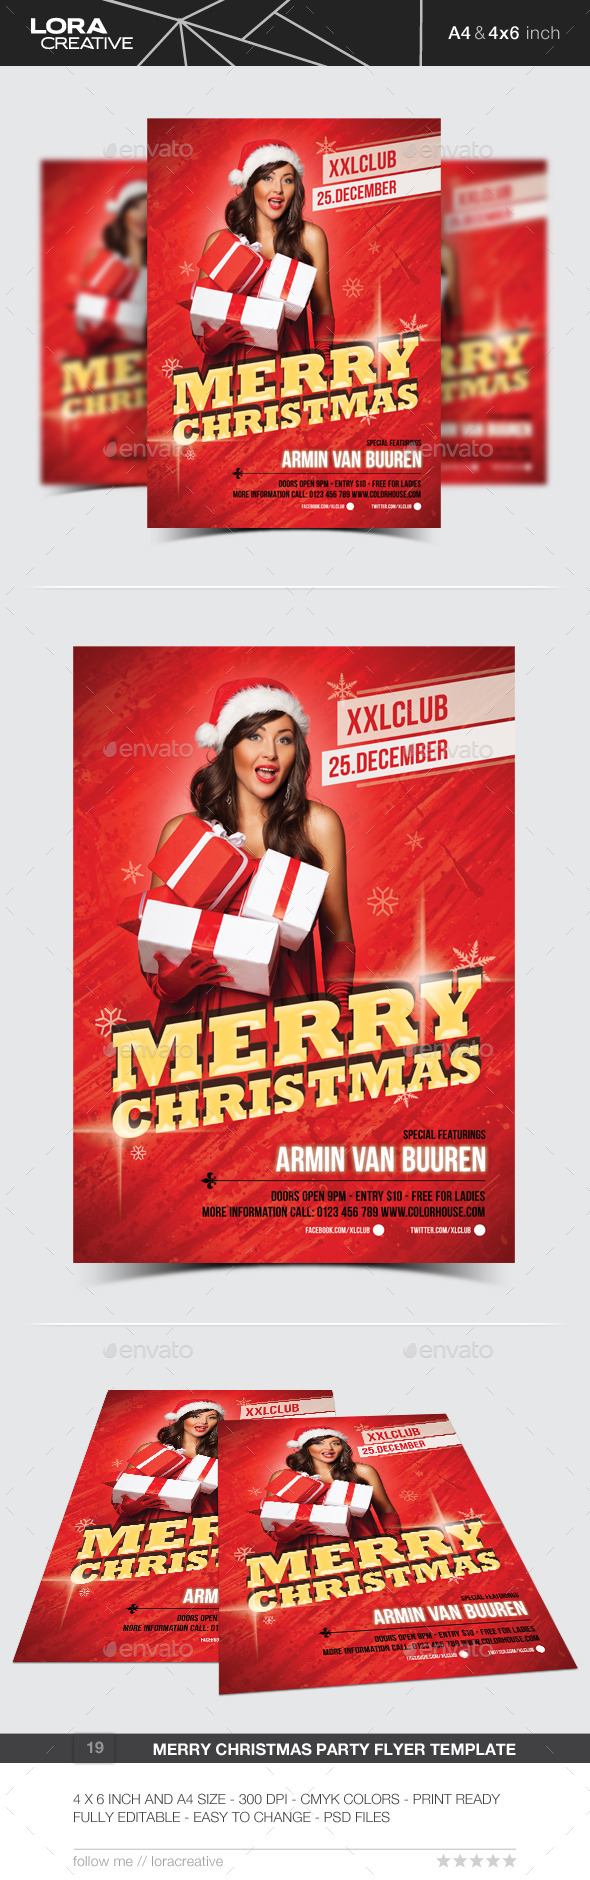 Merry Christmas Party Flyer / Poster - 19